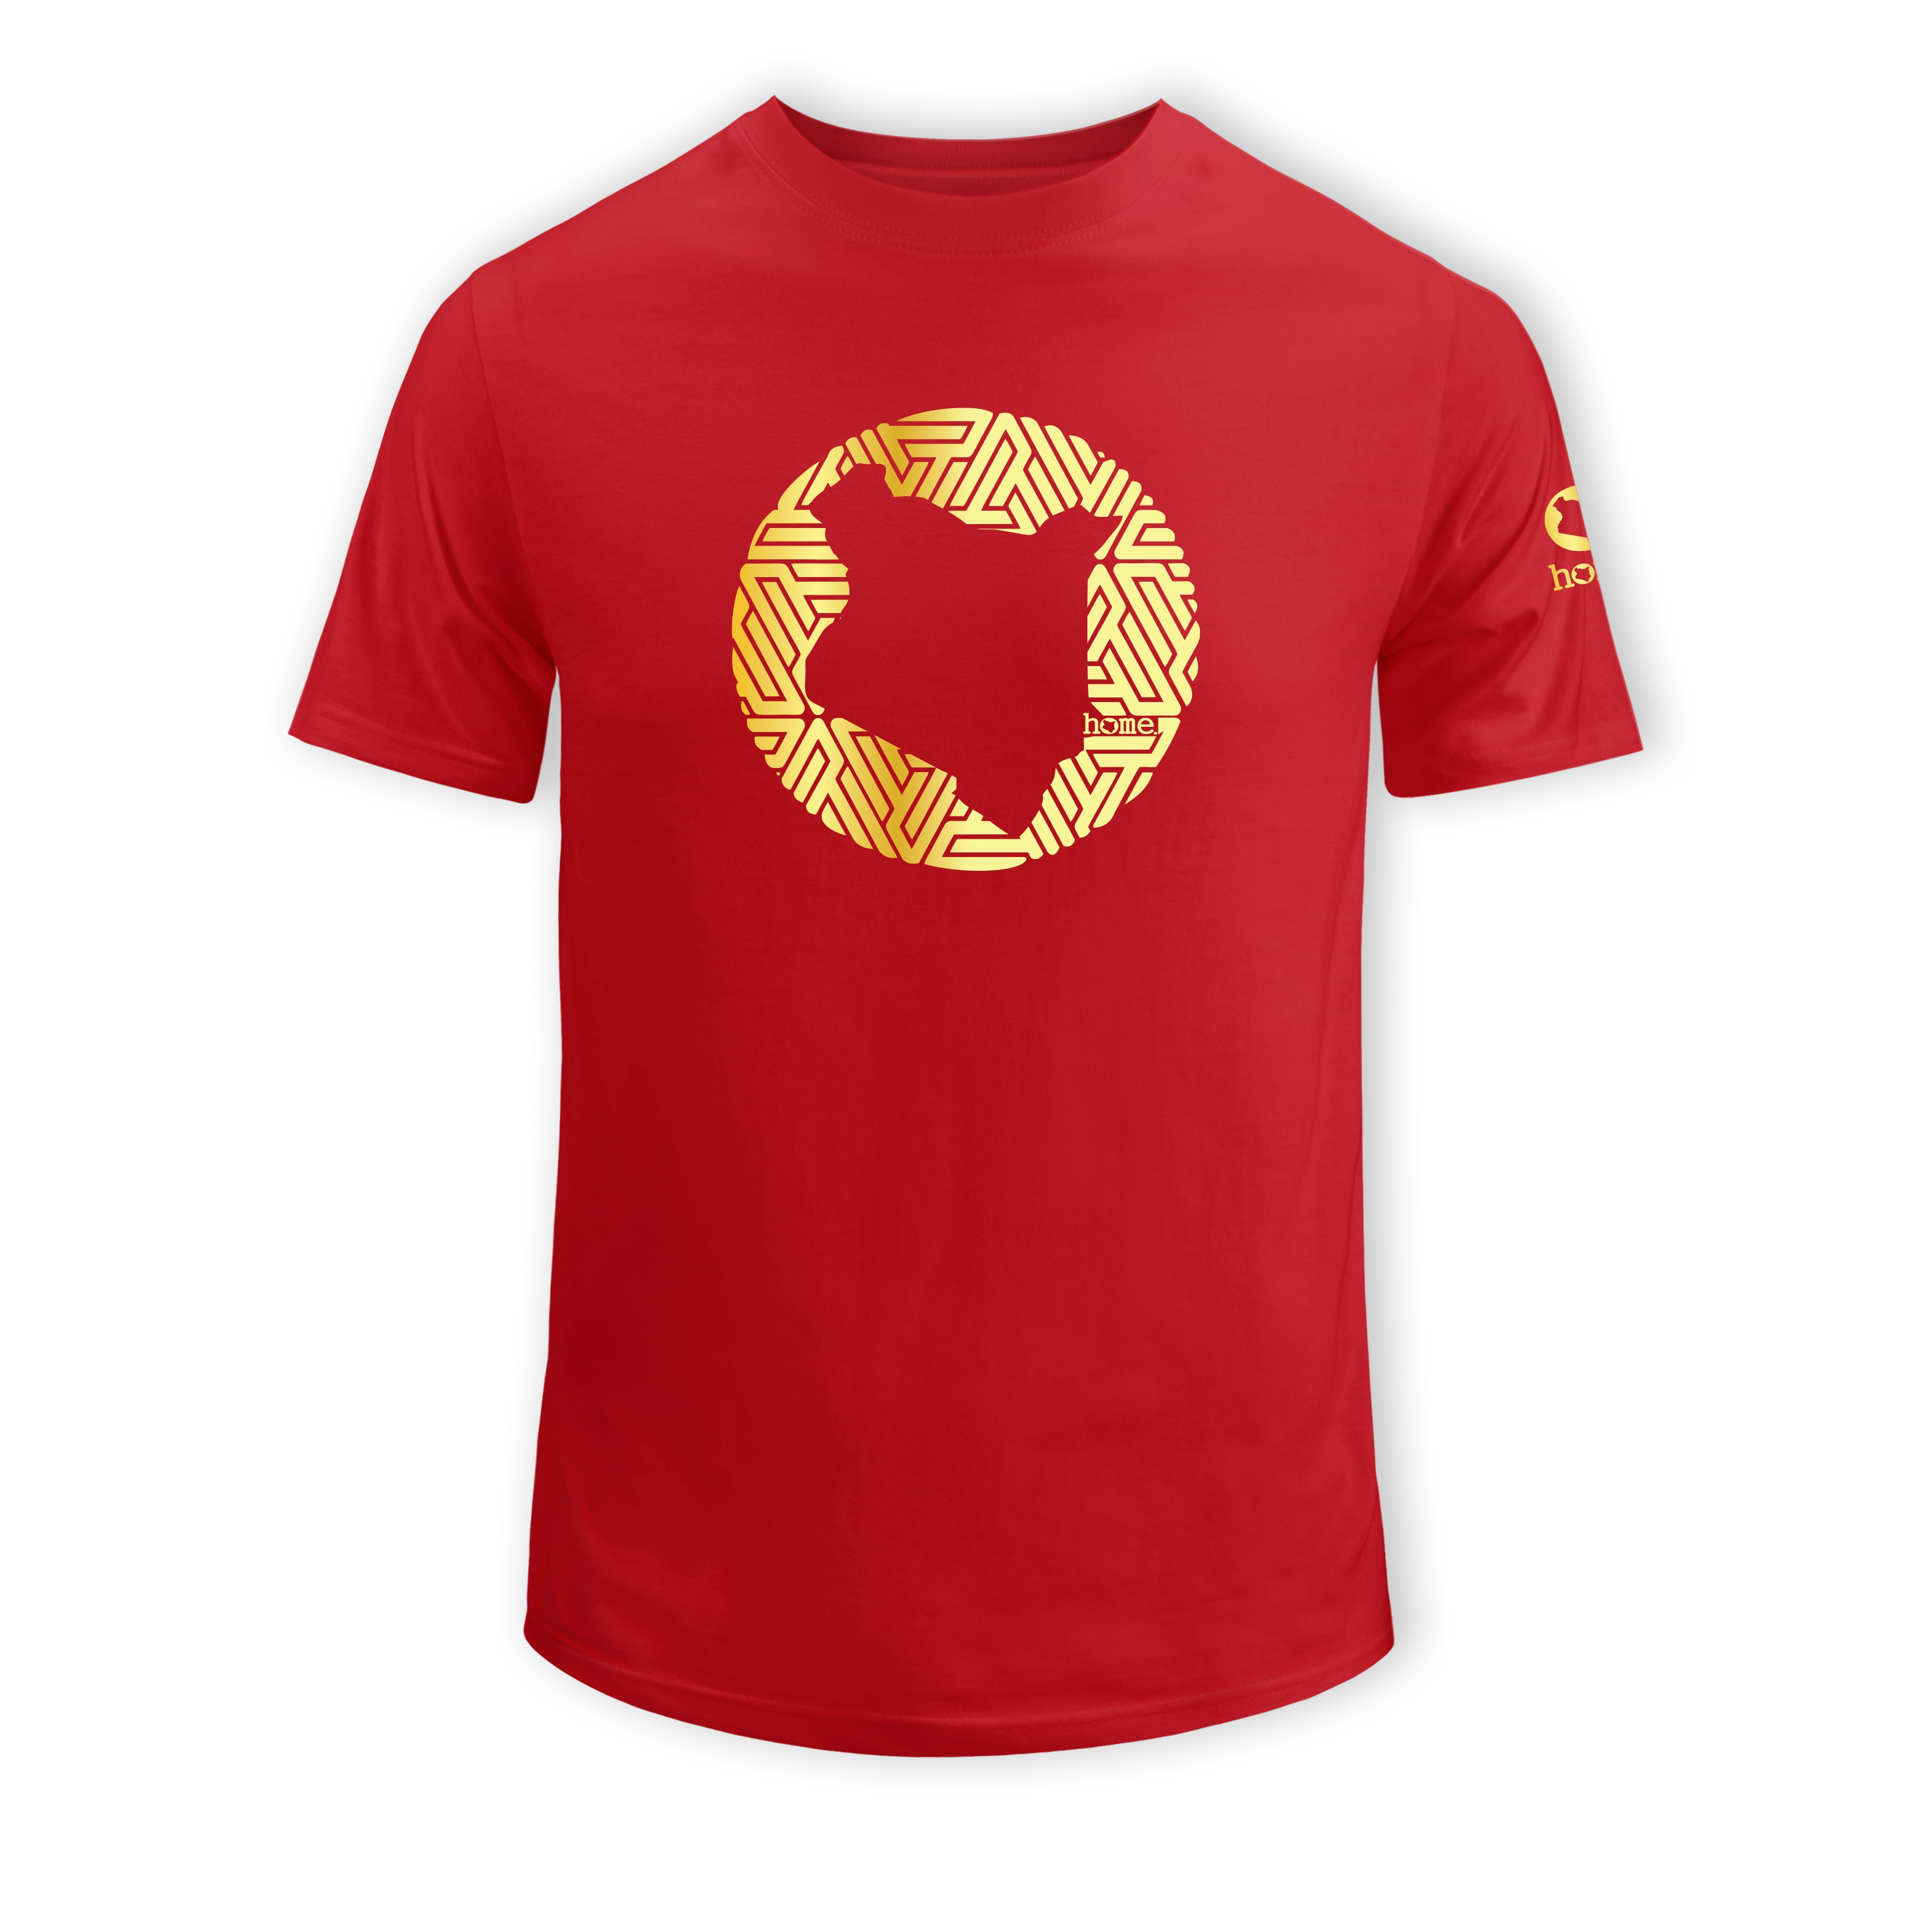 home_254 SHORT-SLEEVED RED T-SHIRT WITH A GOLD MAP PRINT – COTTON PLUS FABRIC